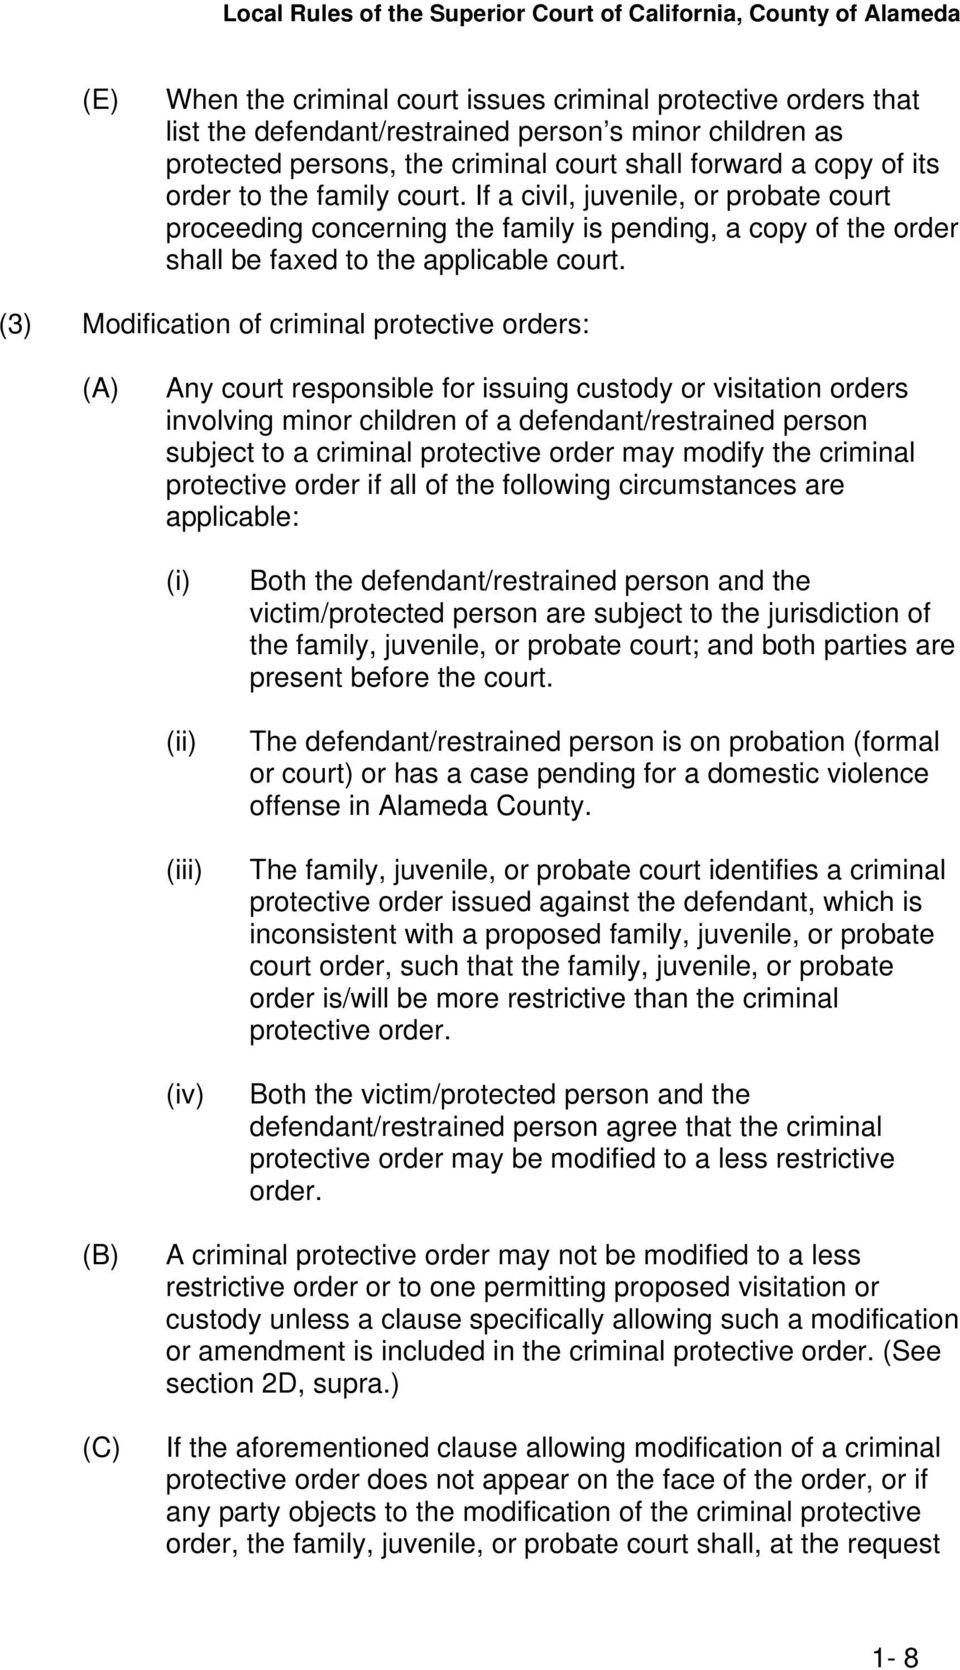 (3) Modification of criminal protective orders: (A) Any court responsible for issuing custody or visitation orders involving minor children of a defendant/restrained person subject to a criminal